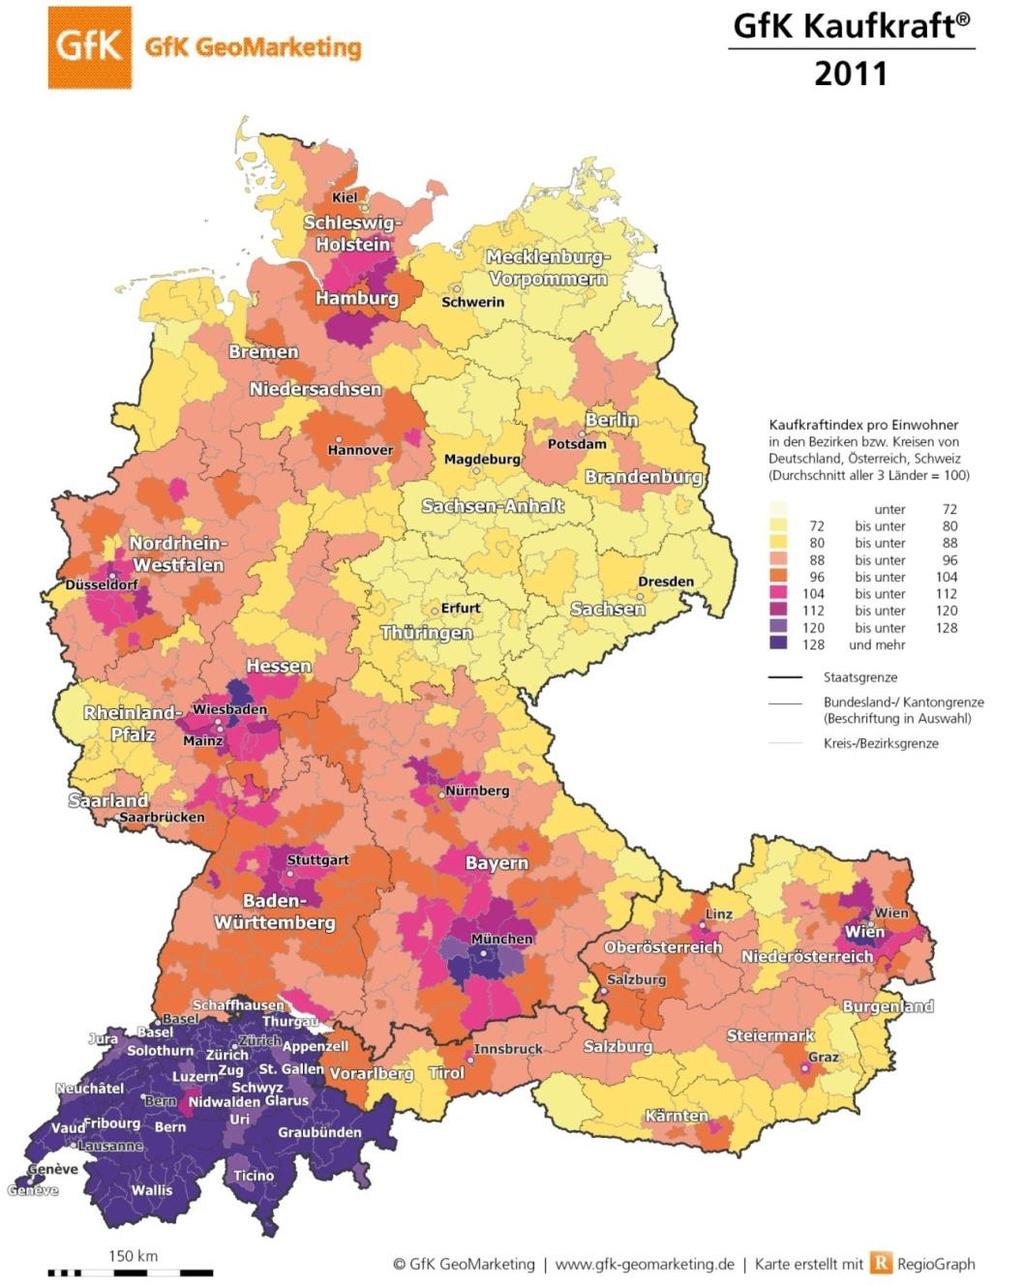 Context Migration flows from Germany to Switzerland in the context of free movements of